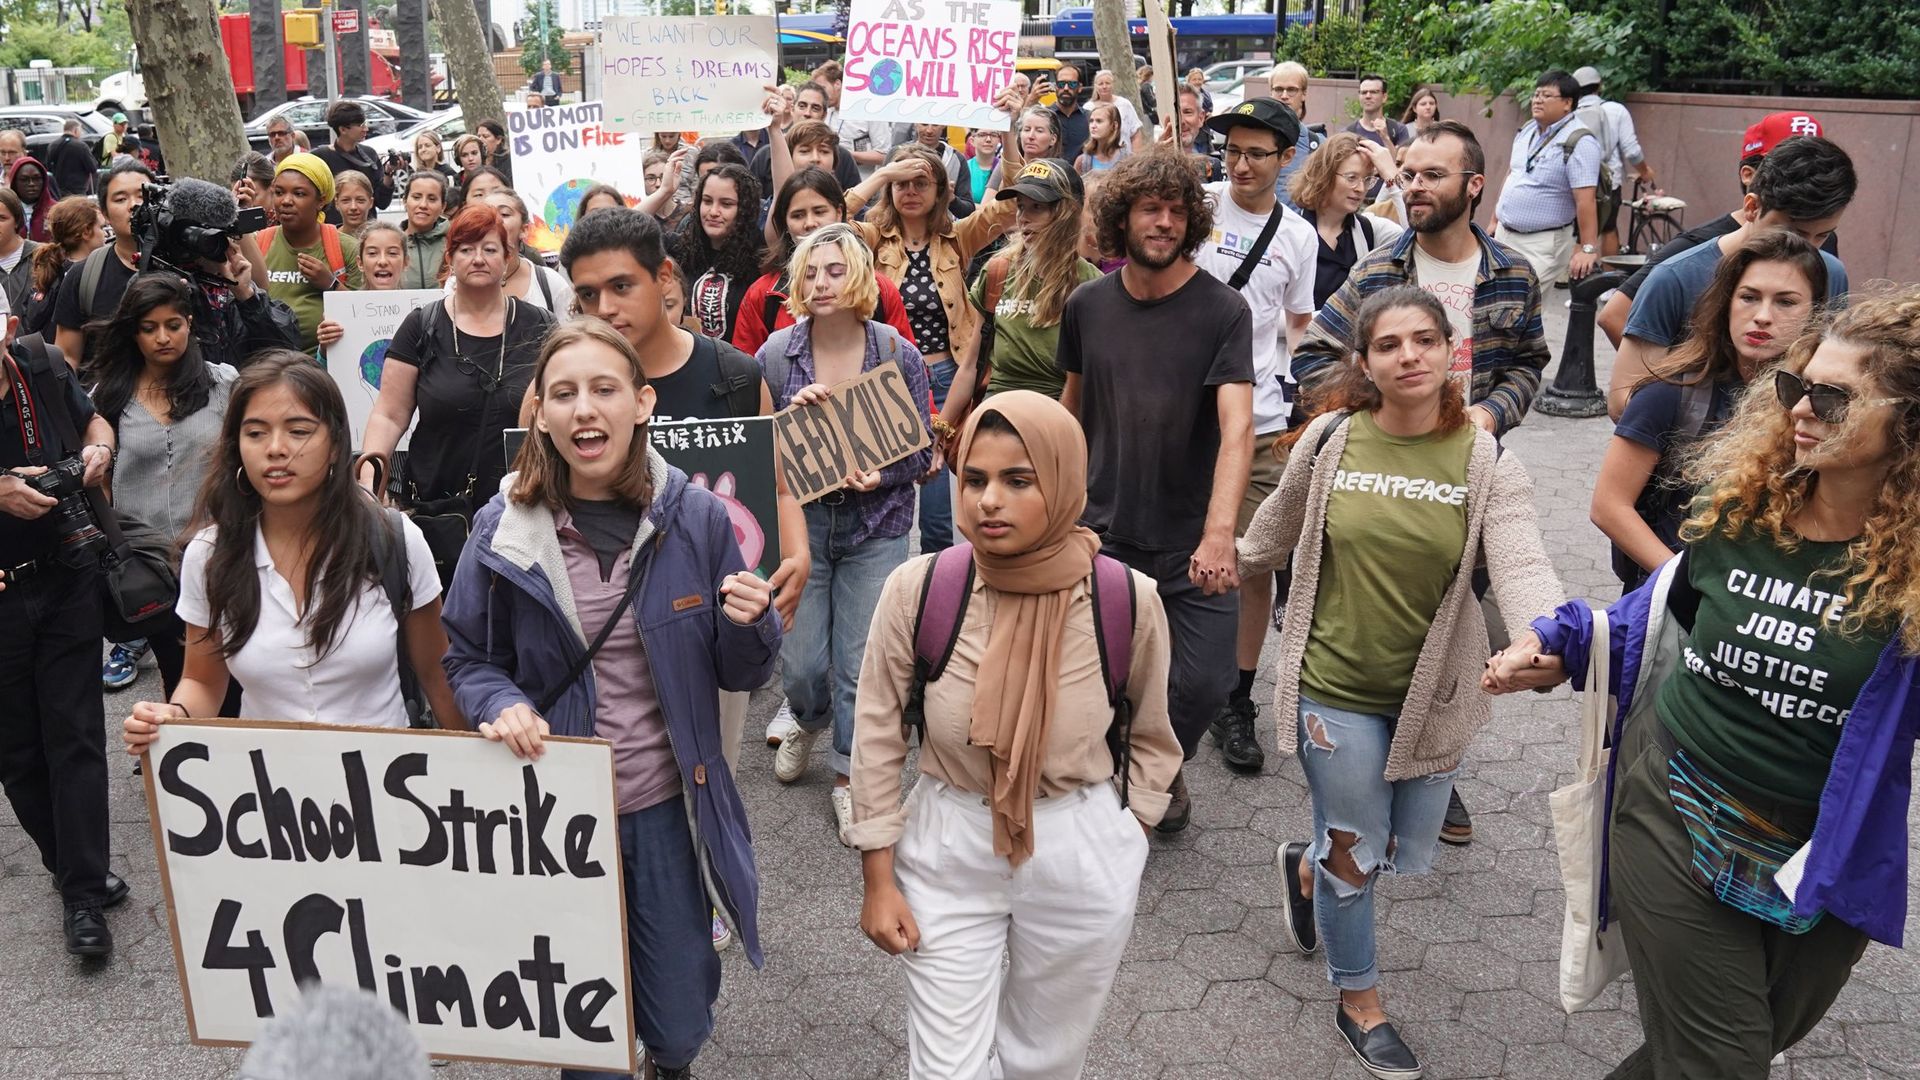 Students march outside the United Nations during a protest against climate change on September 6, 2019 in New York.